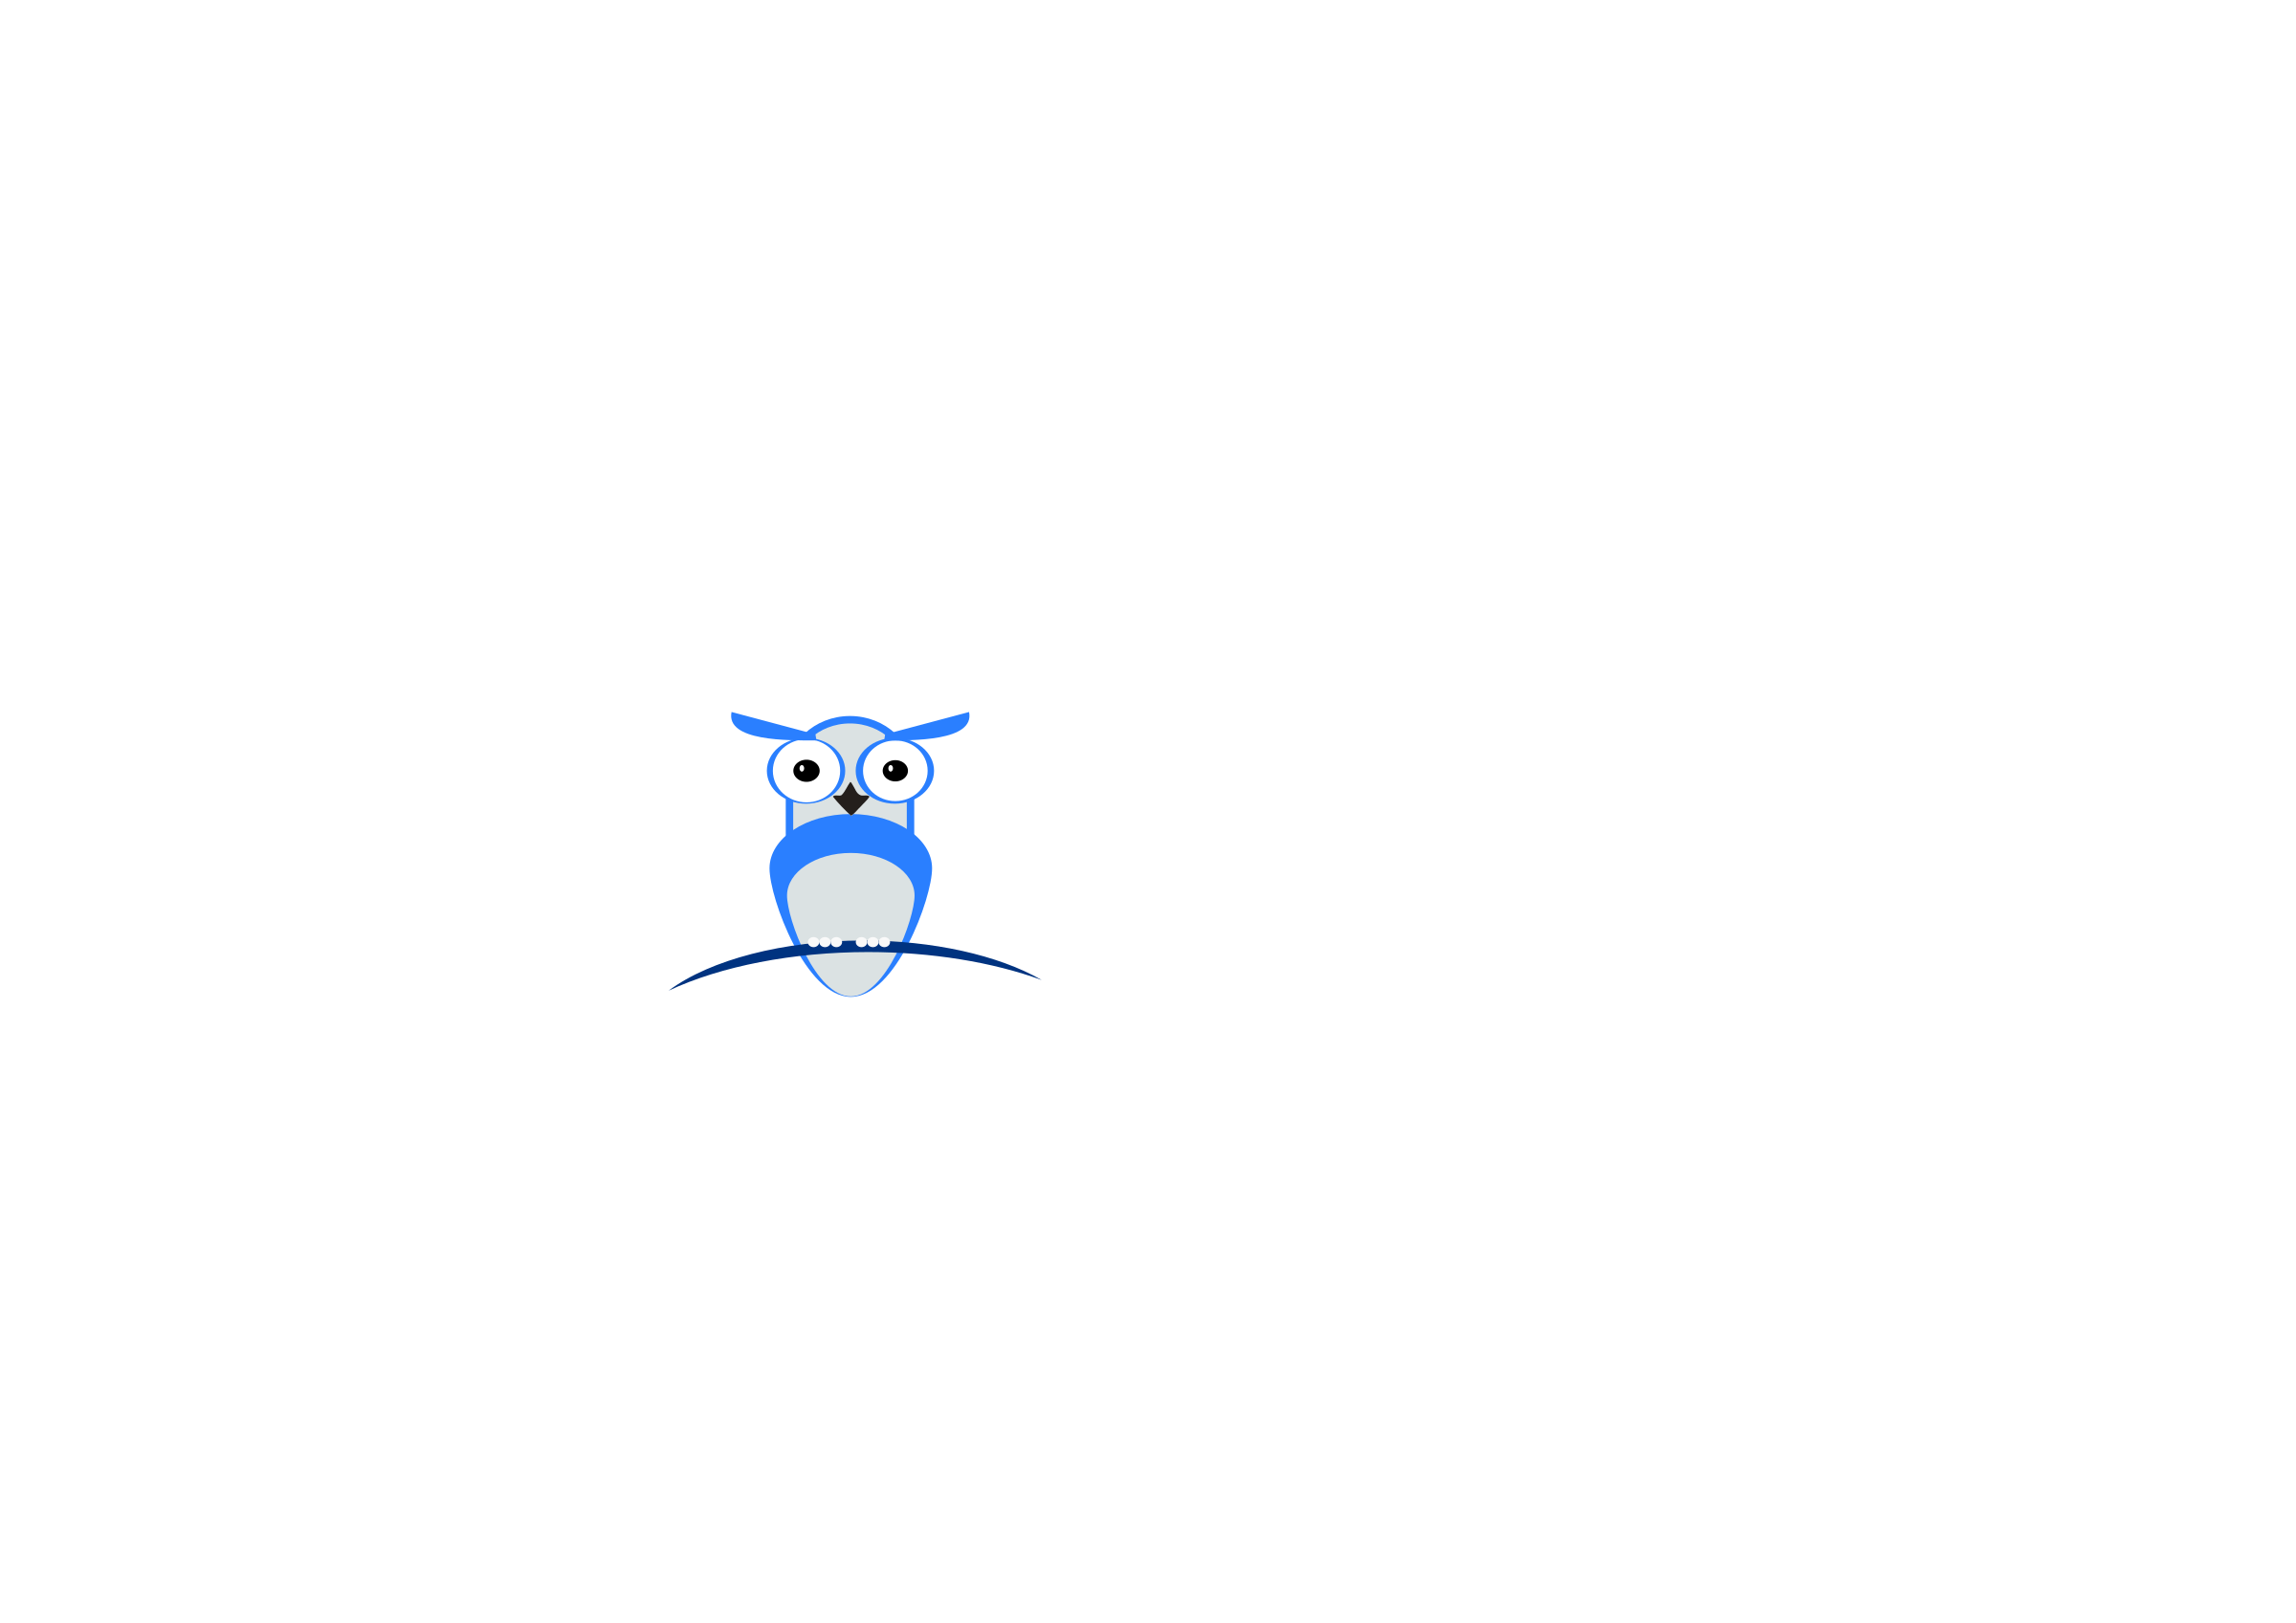 https://openclipart.org/image/2400px/svg_to_png/220596/remixowl.png